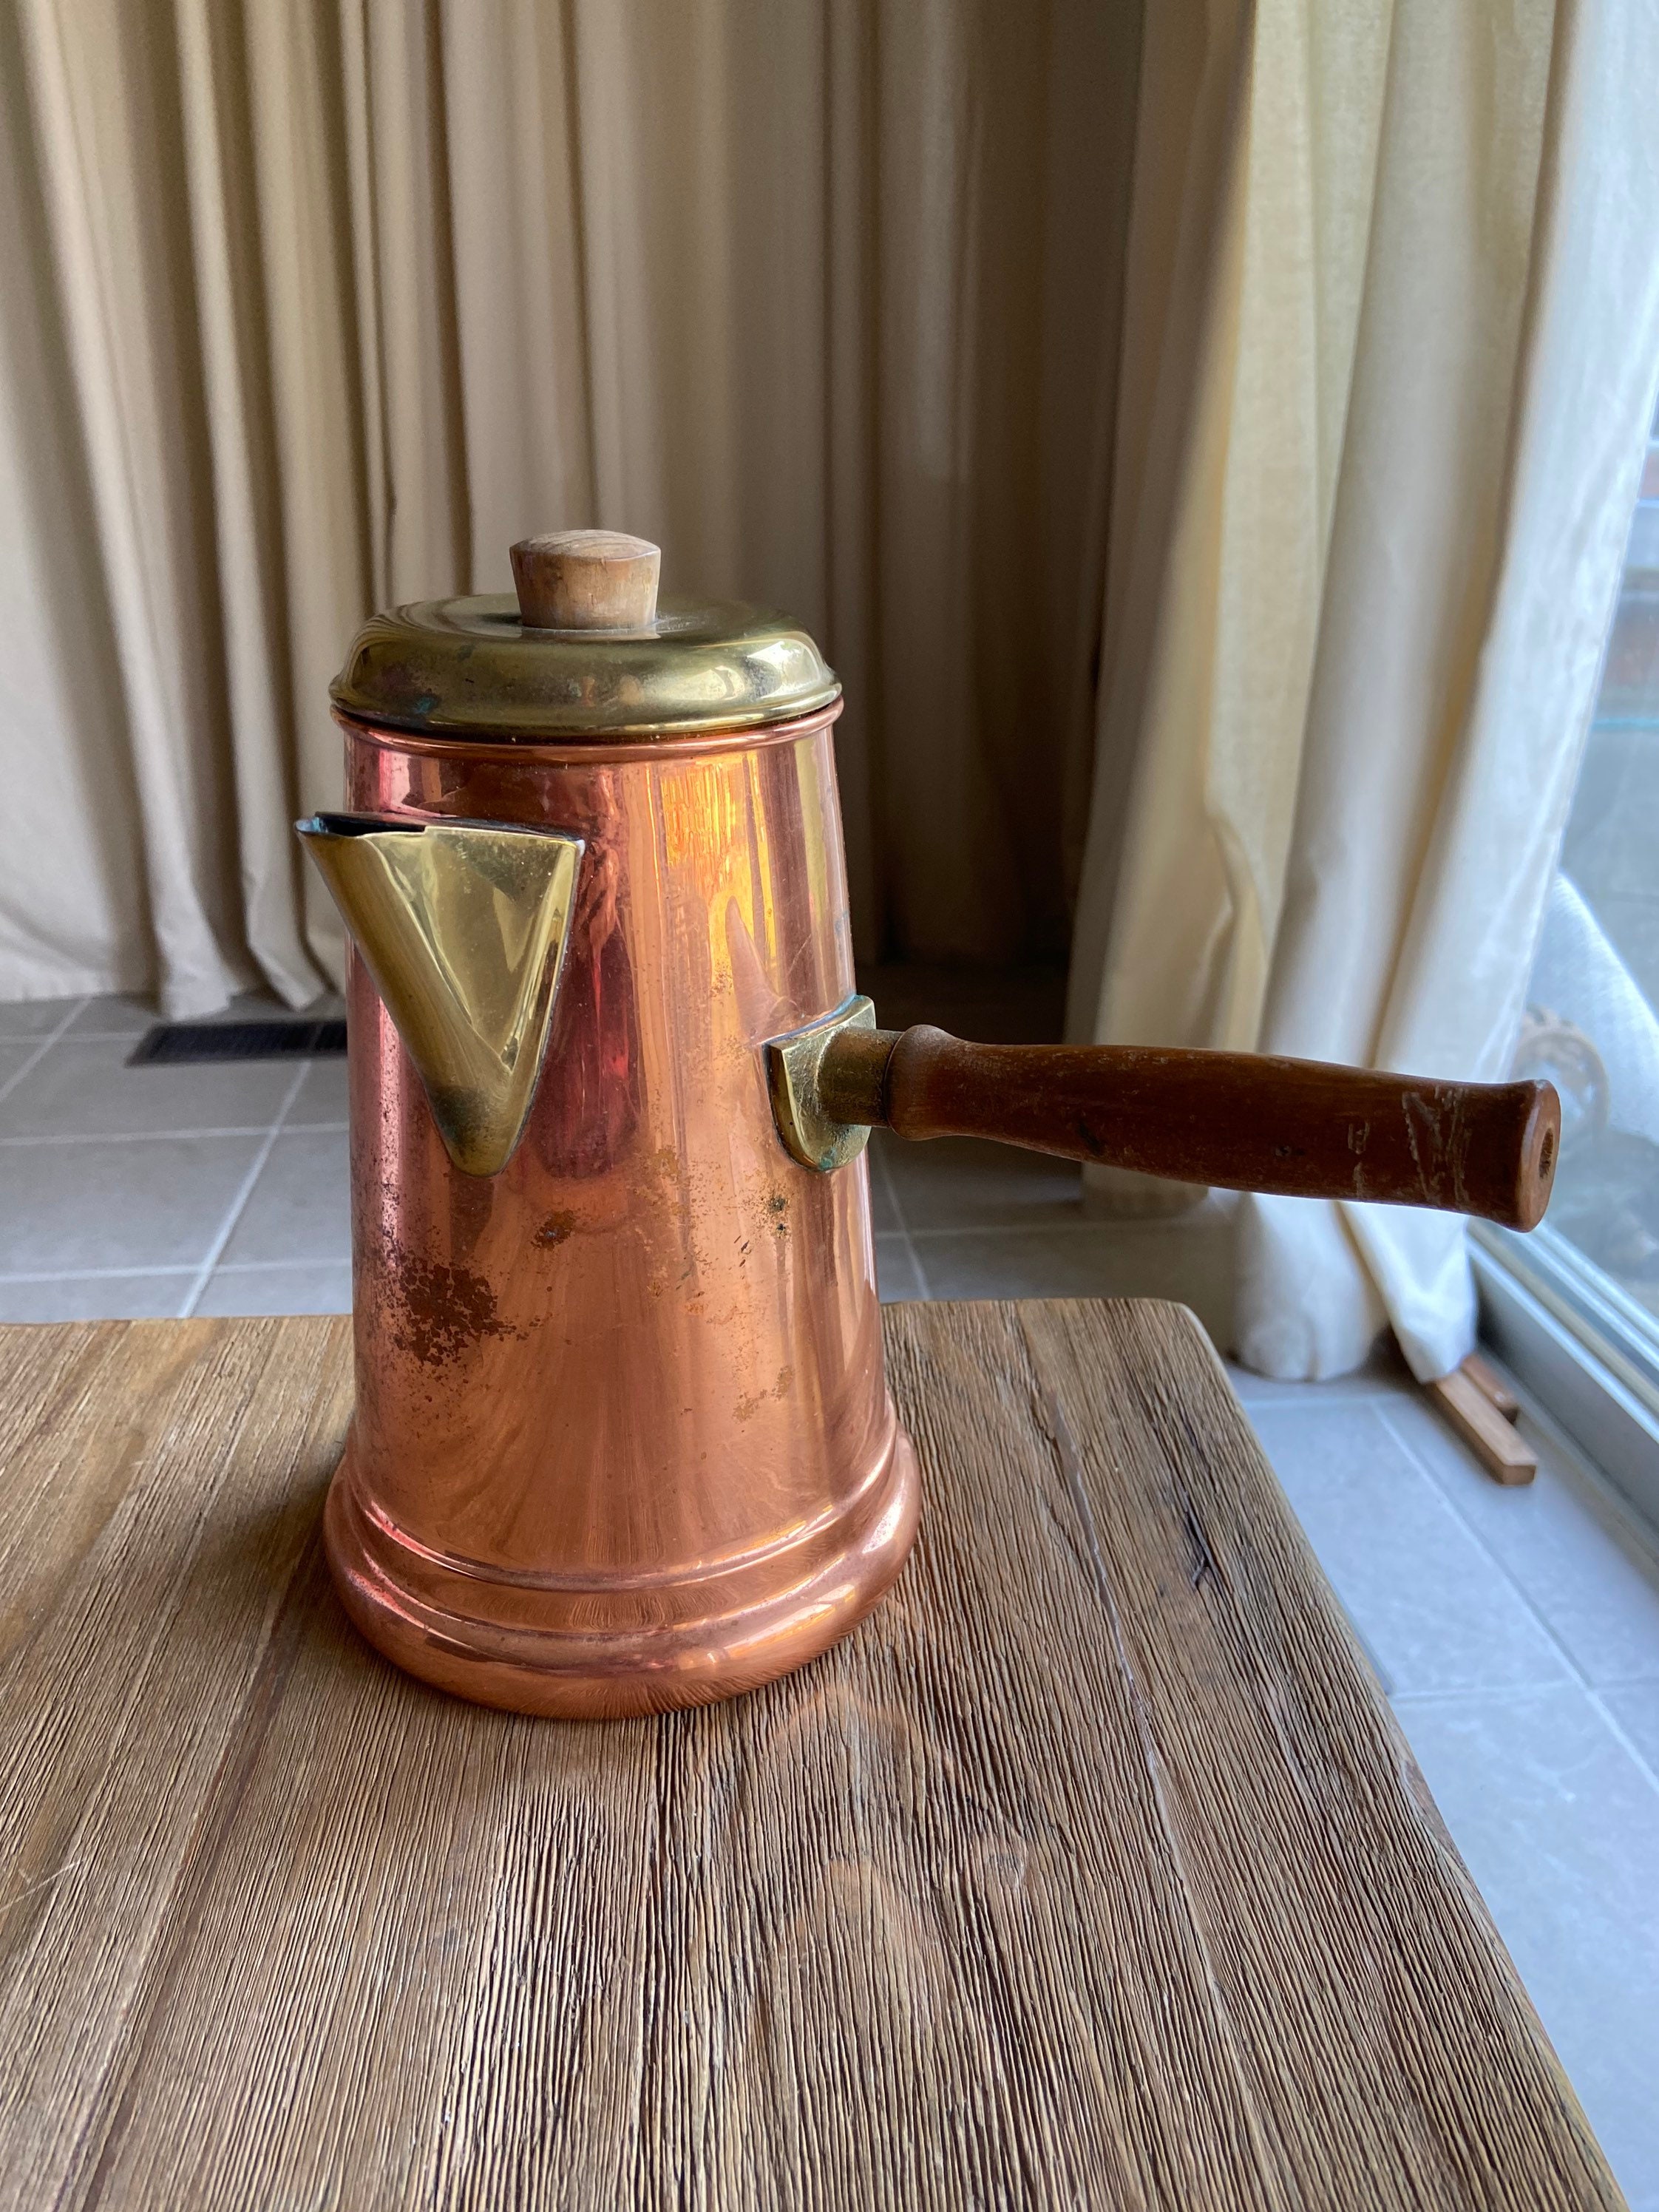 Copper & Brass Antique Coffee Pot or Urn, Gallery Cup Warmer